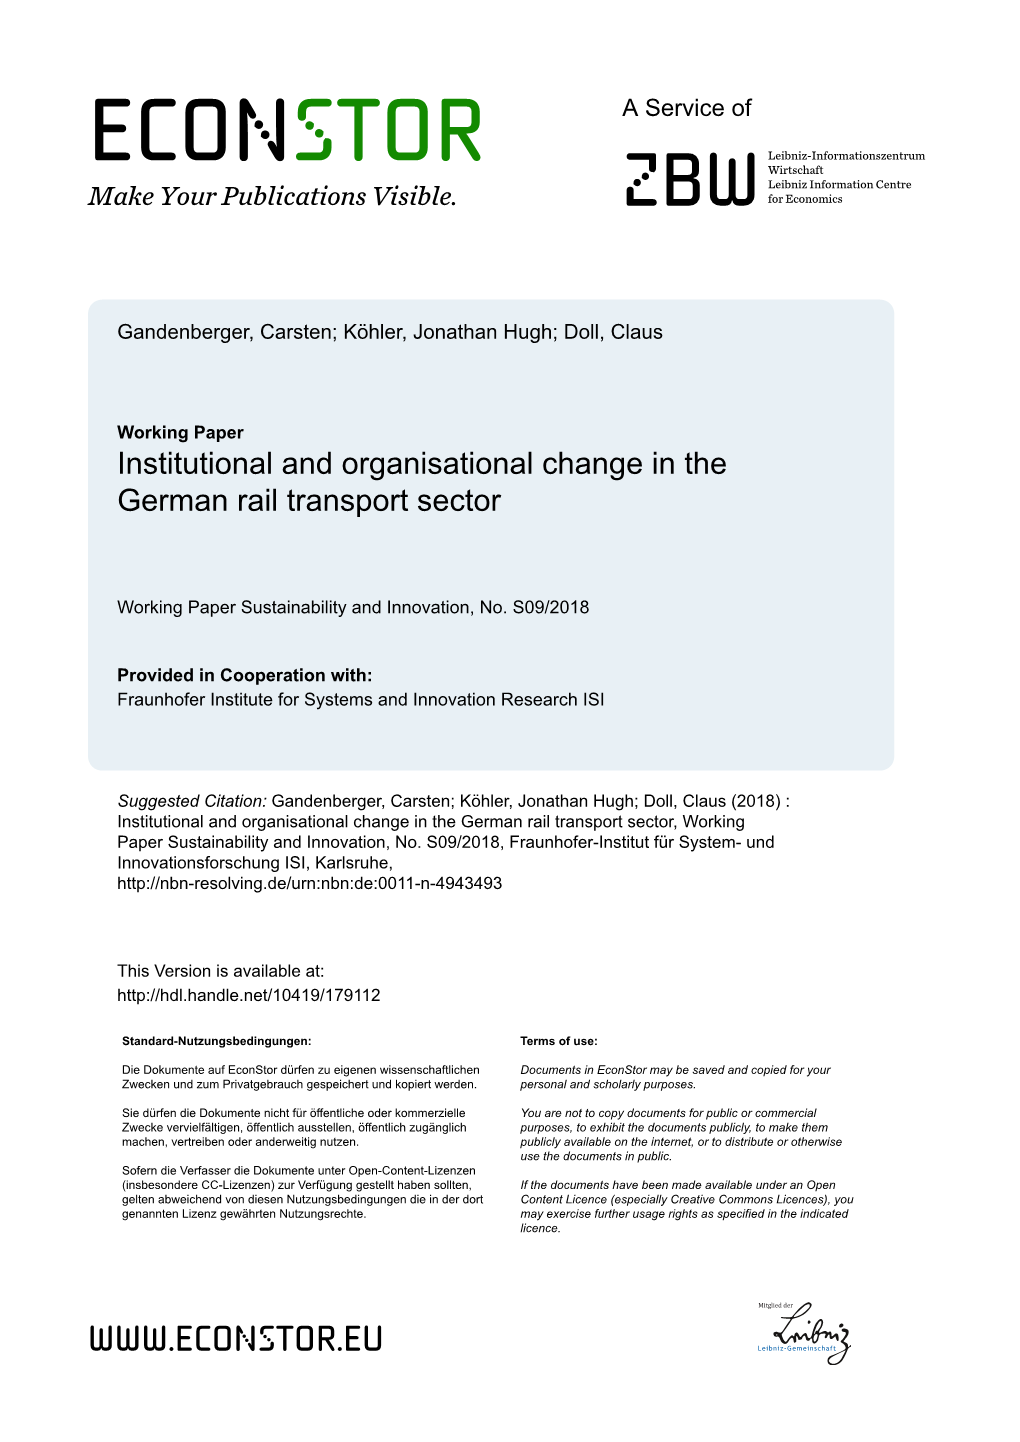 Institutional and Organisational Change in the German Rail Transport Sector